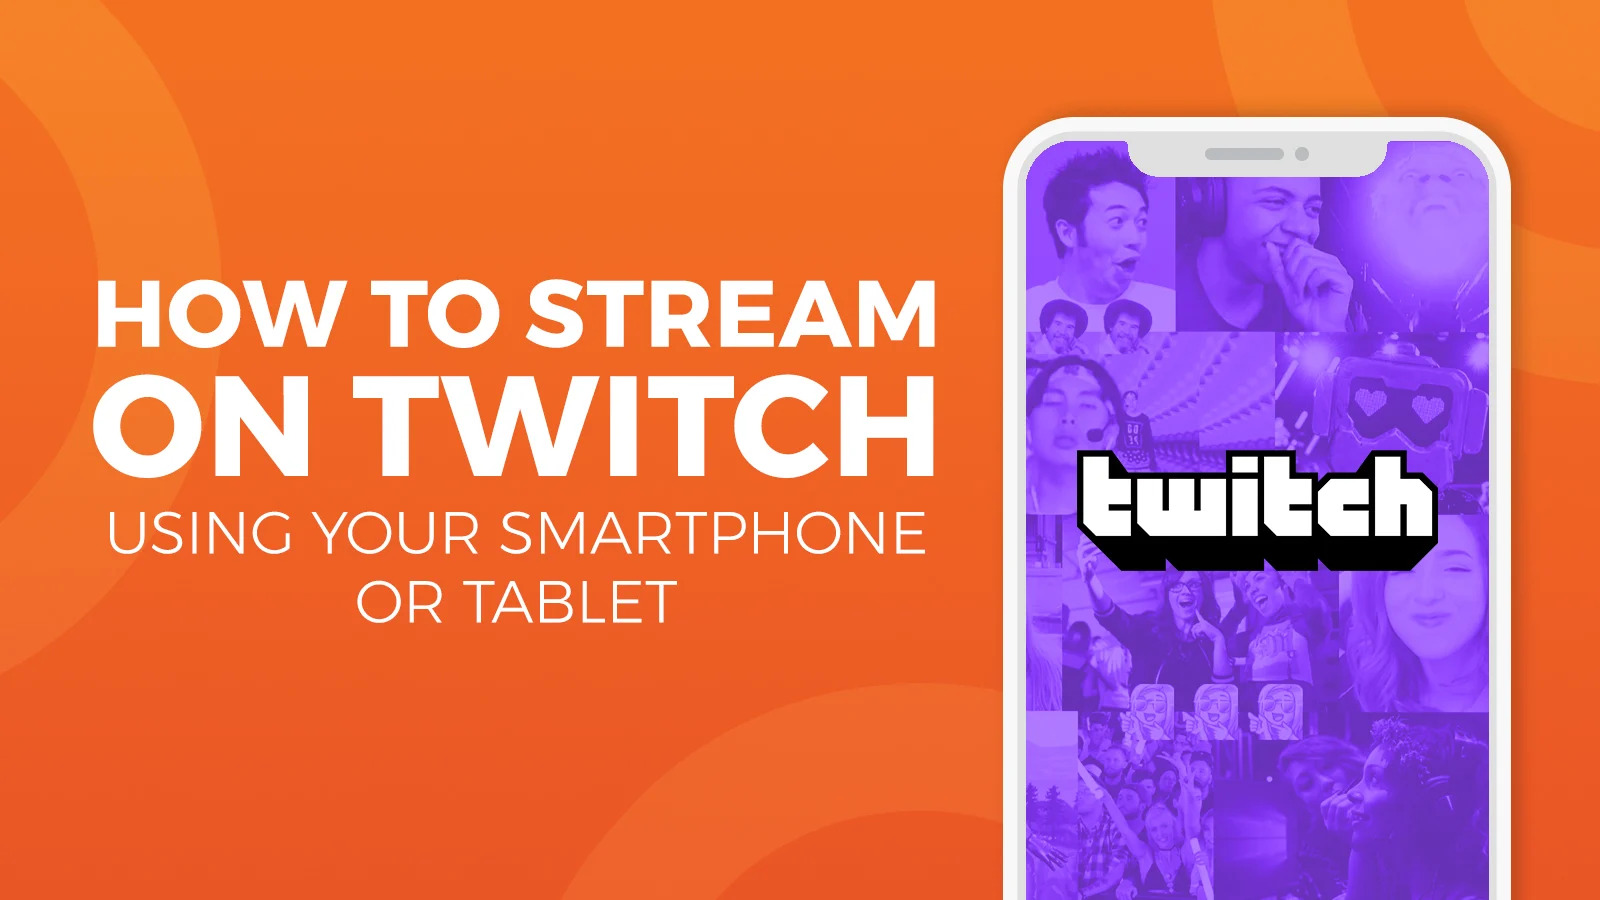 How To Stream Tablet To Twitch